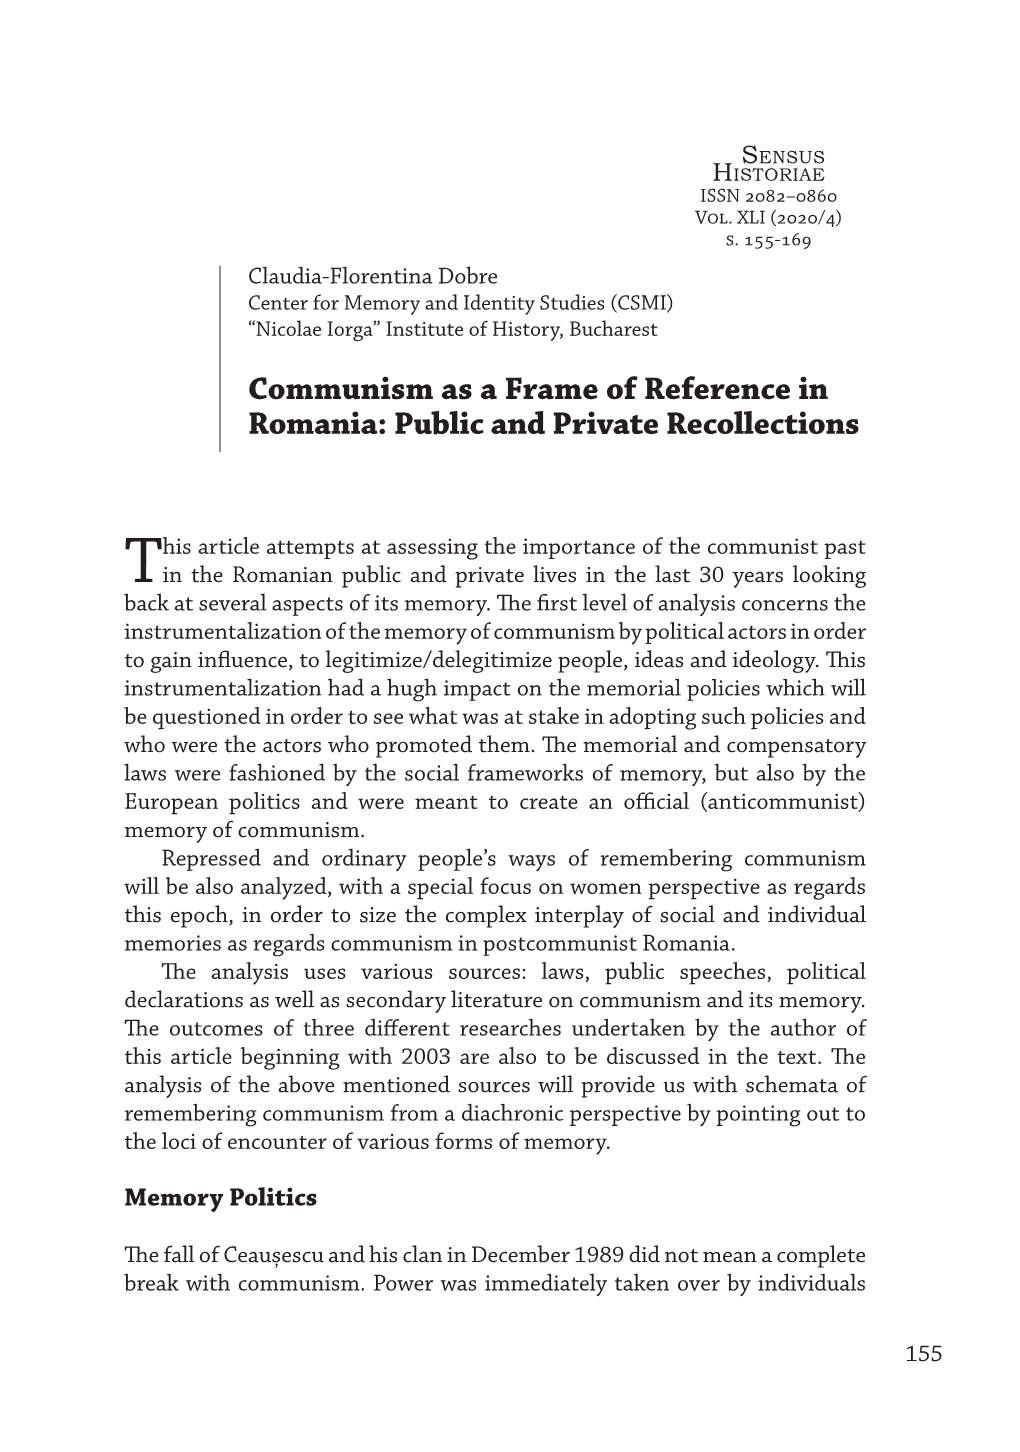 Communism As a Frame of Reference in Romania: Public and Private Recollections